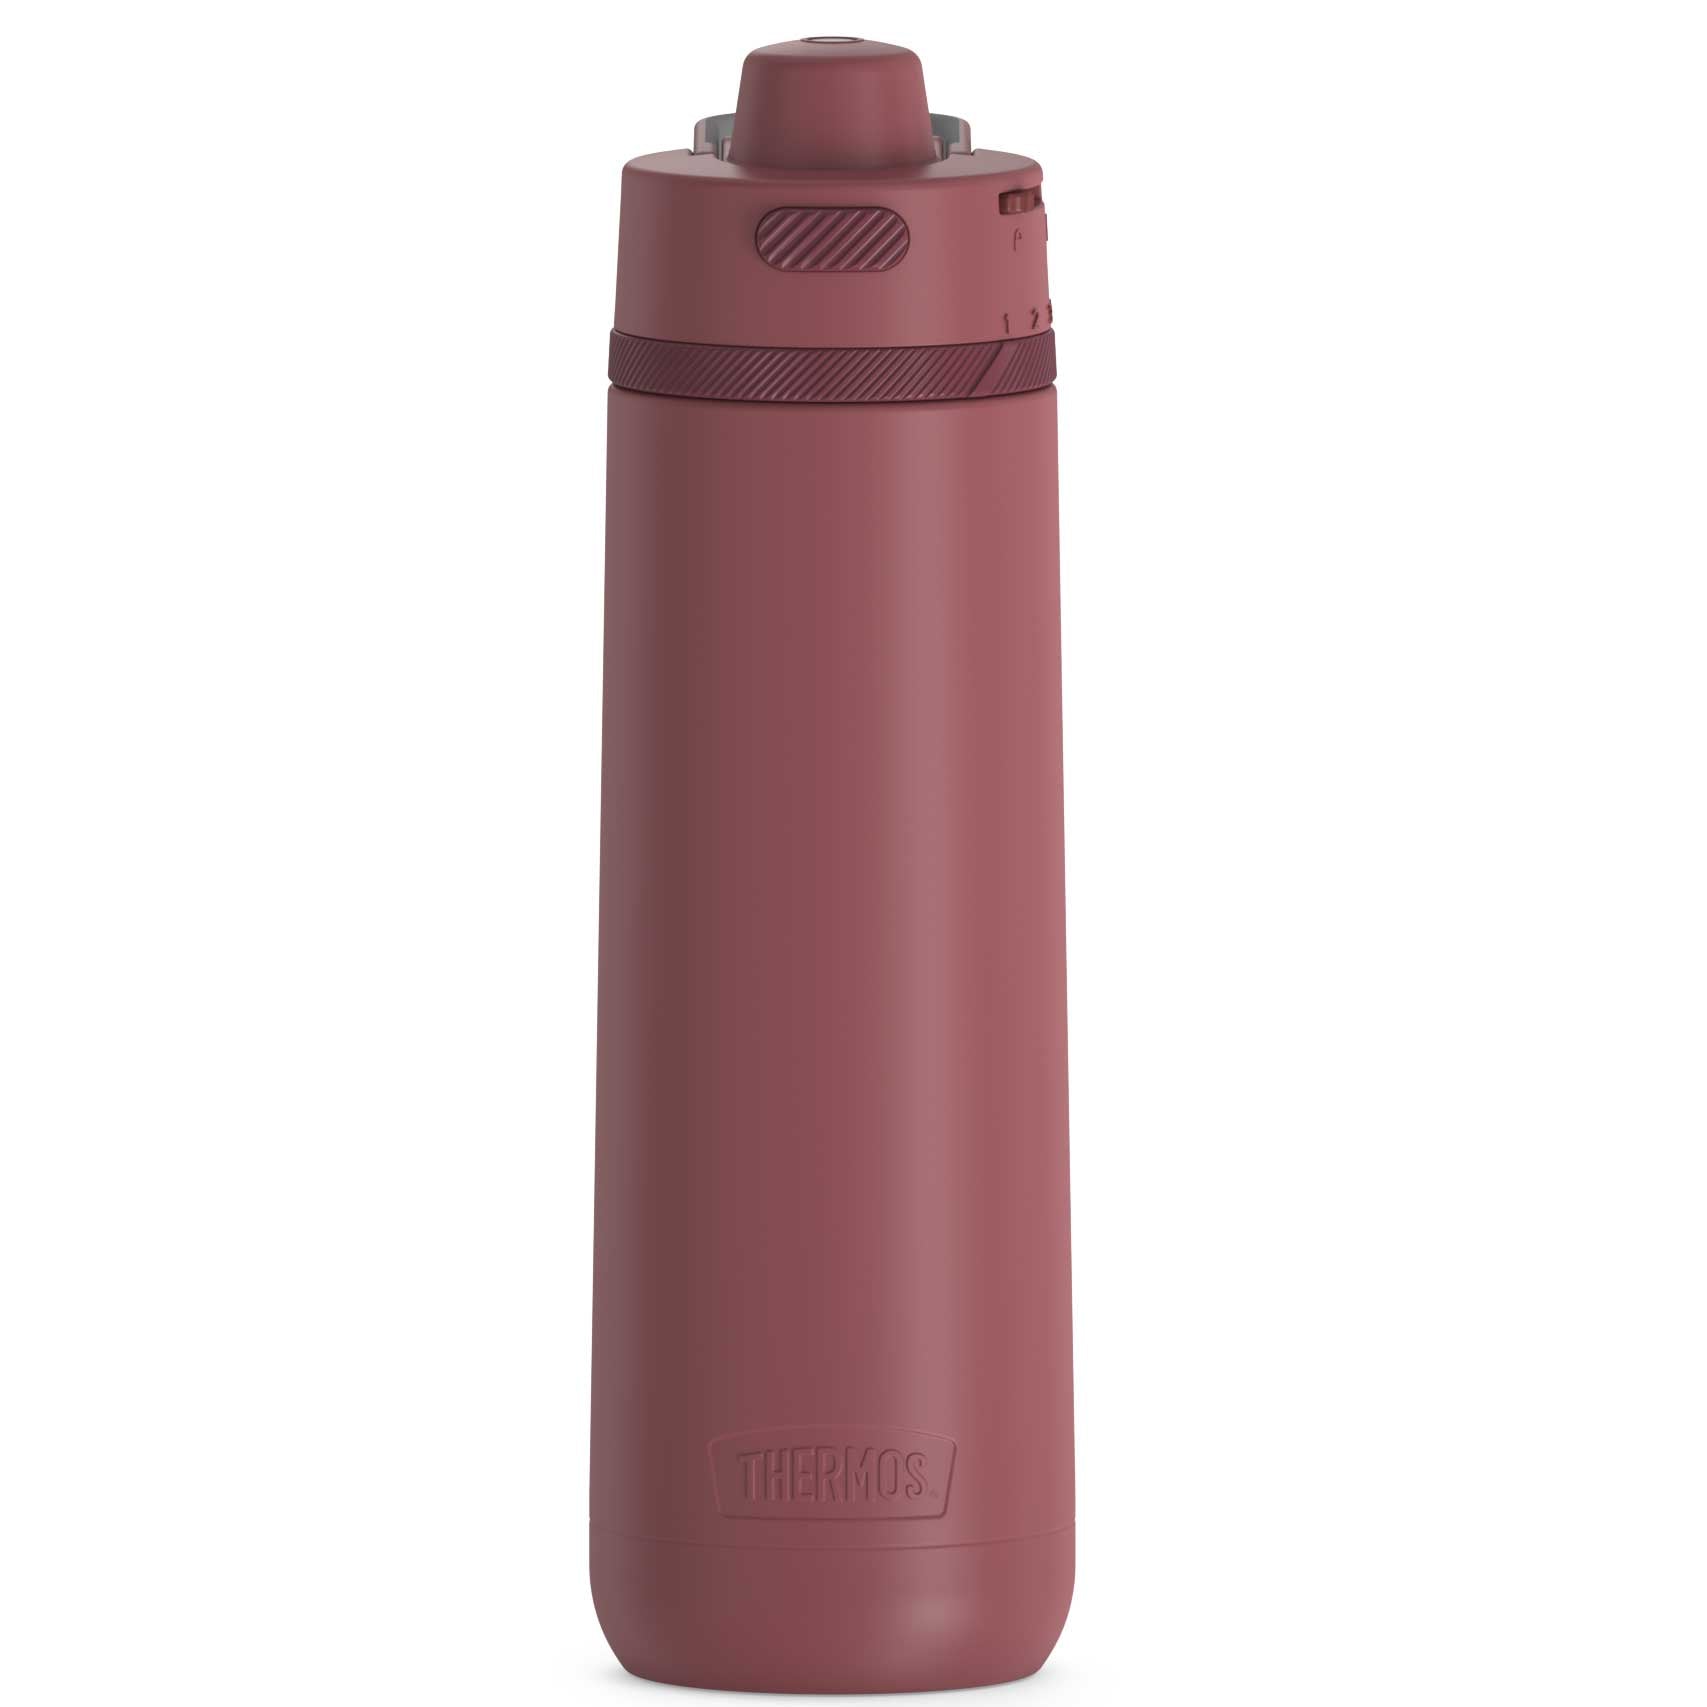 Thermos 24 oz. Hydration Bottle with Intake Meter